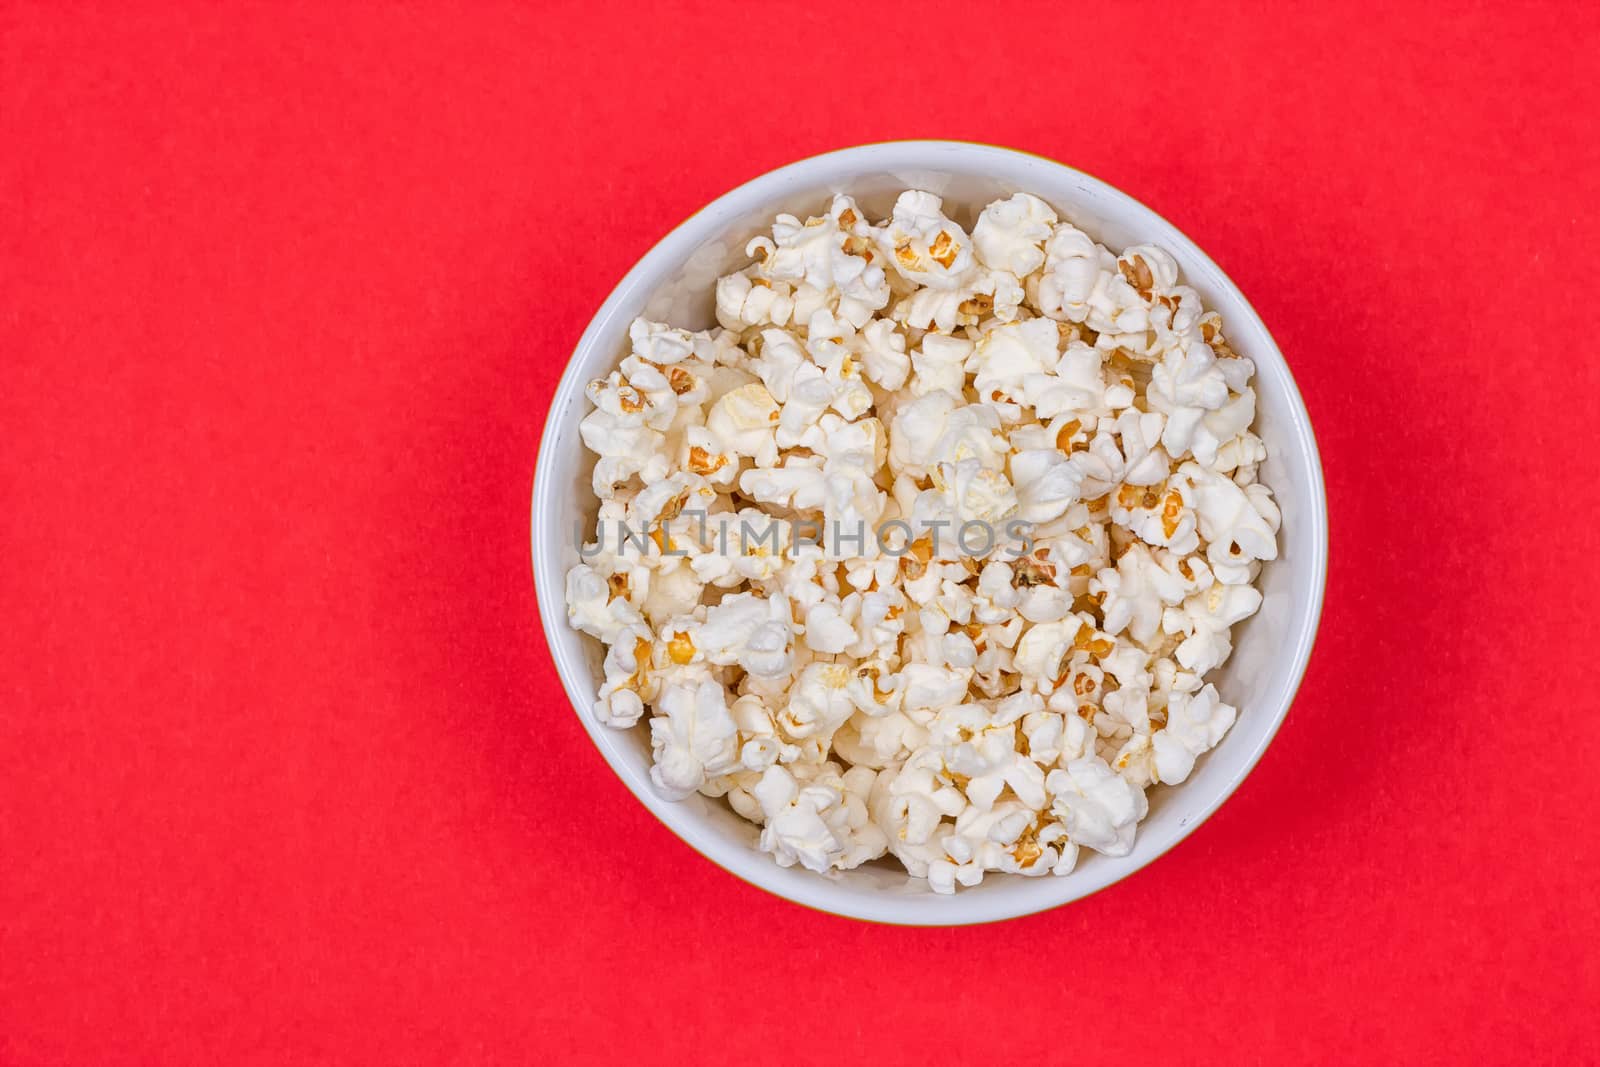 Bowl of Delicious Popcorn spilling onto a red background